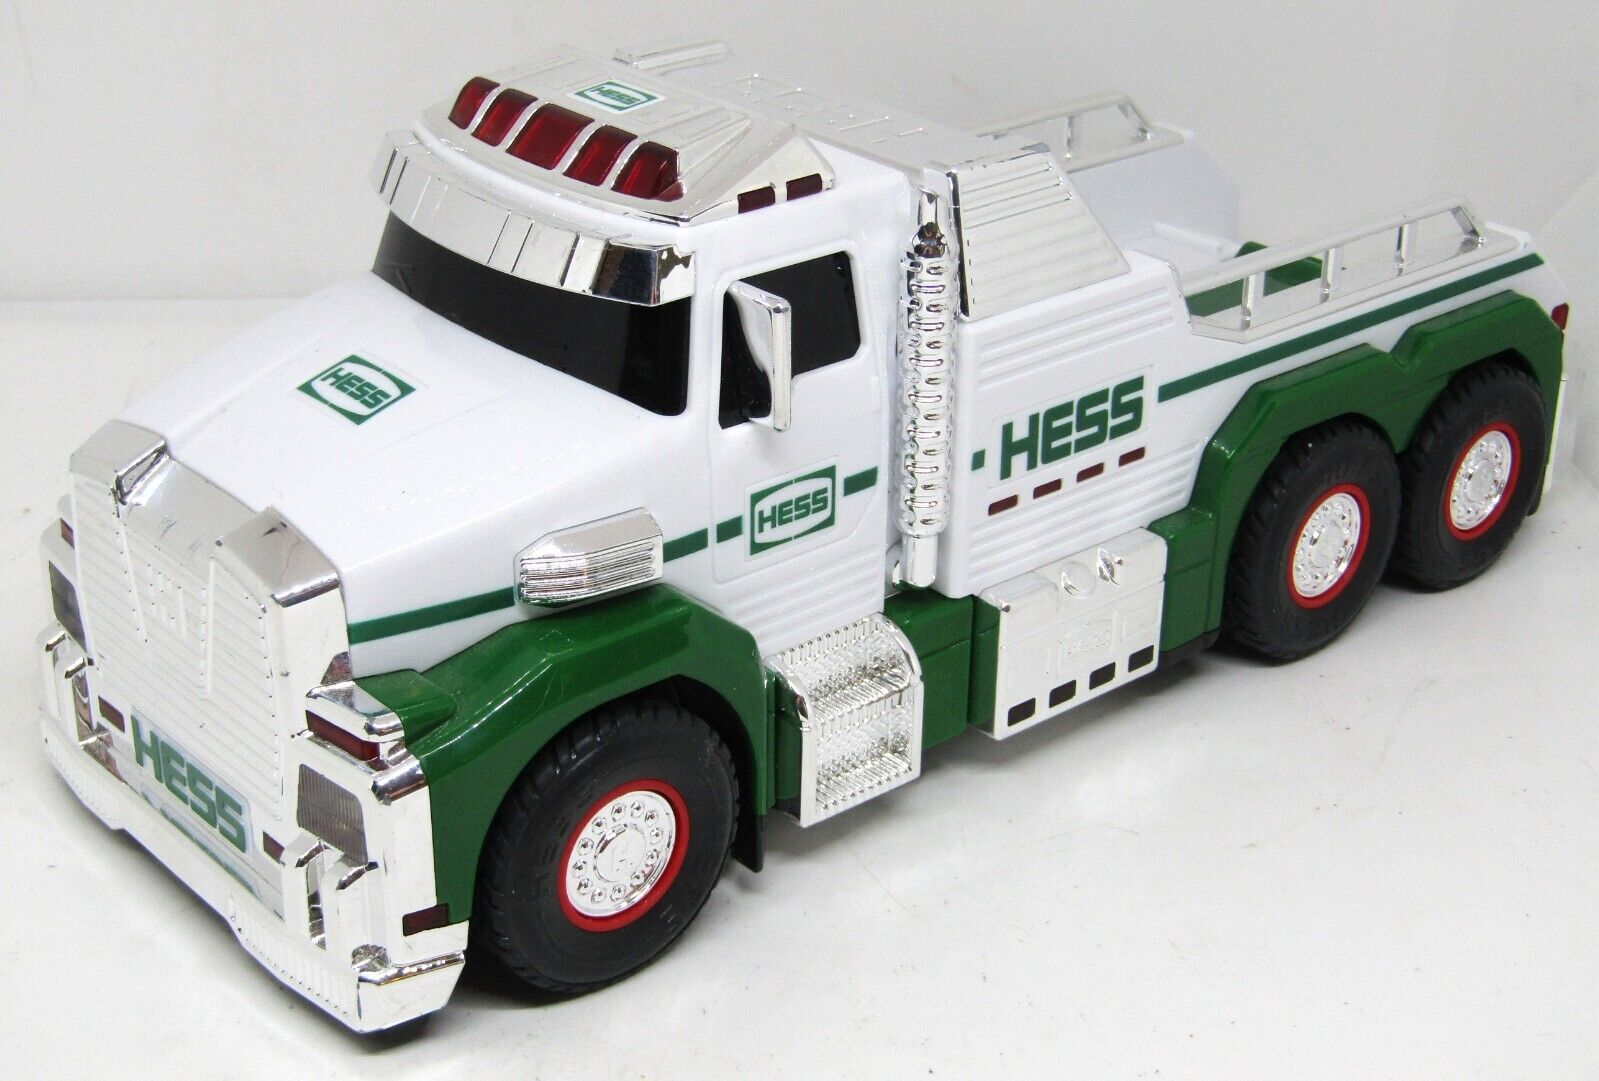 Hess Corporation, Truck with Flashing Lights, 2019.